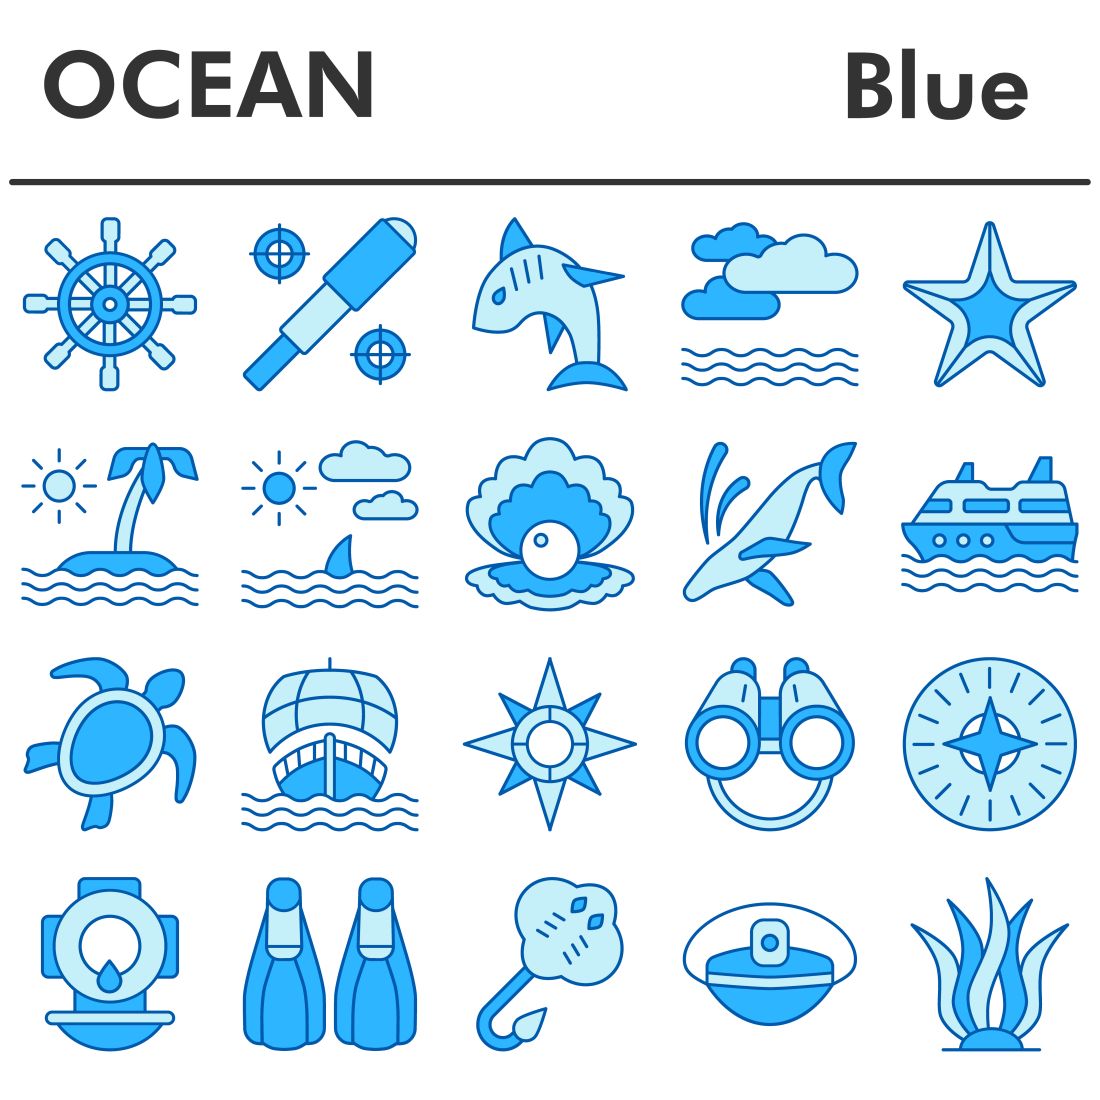 Ocean icons set, blue style cover image.